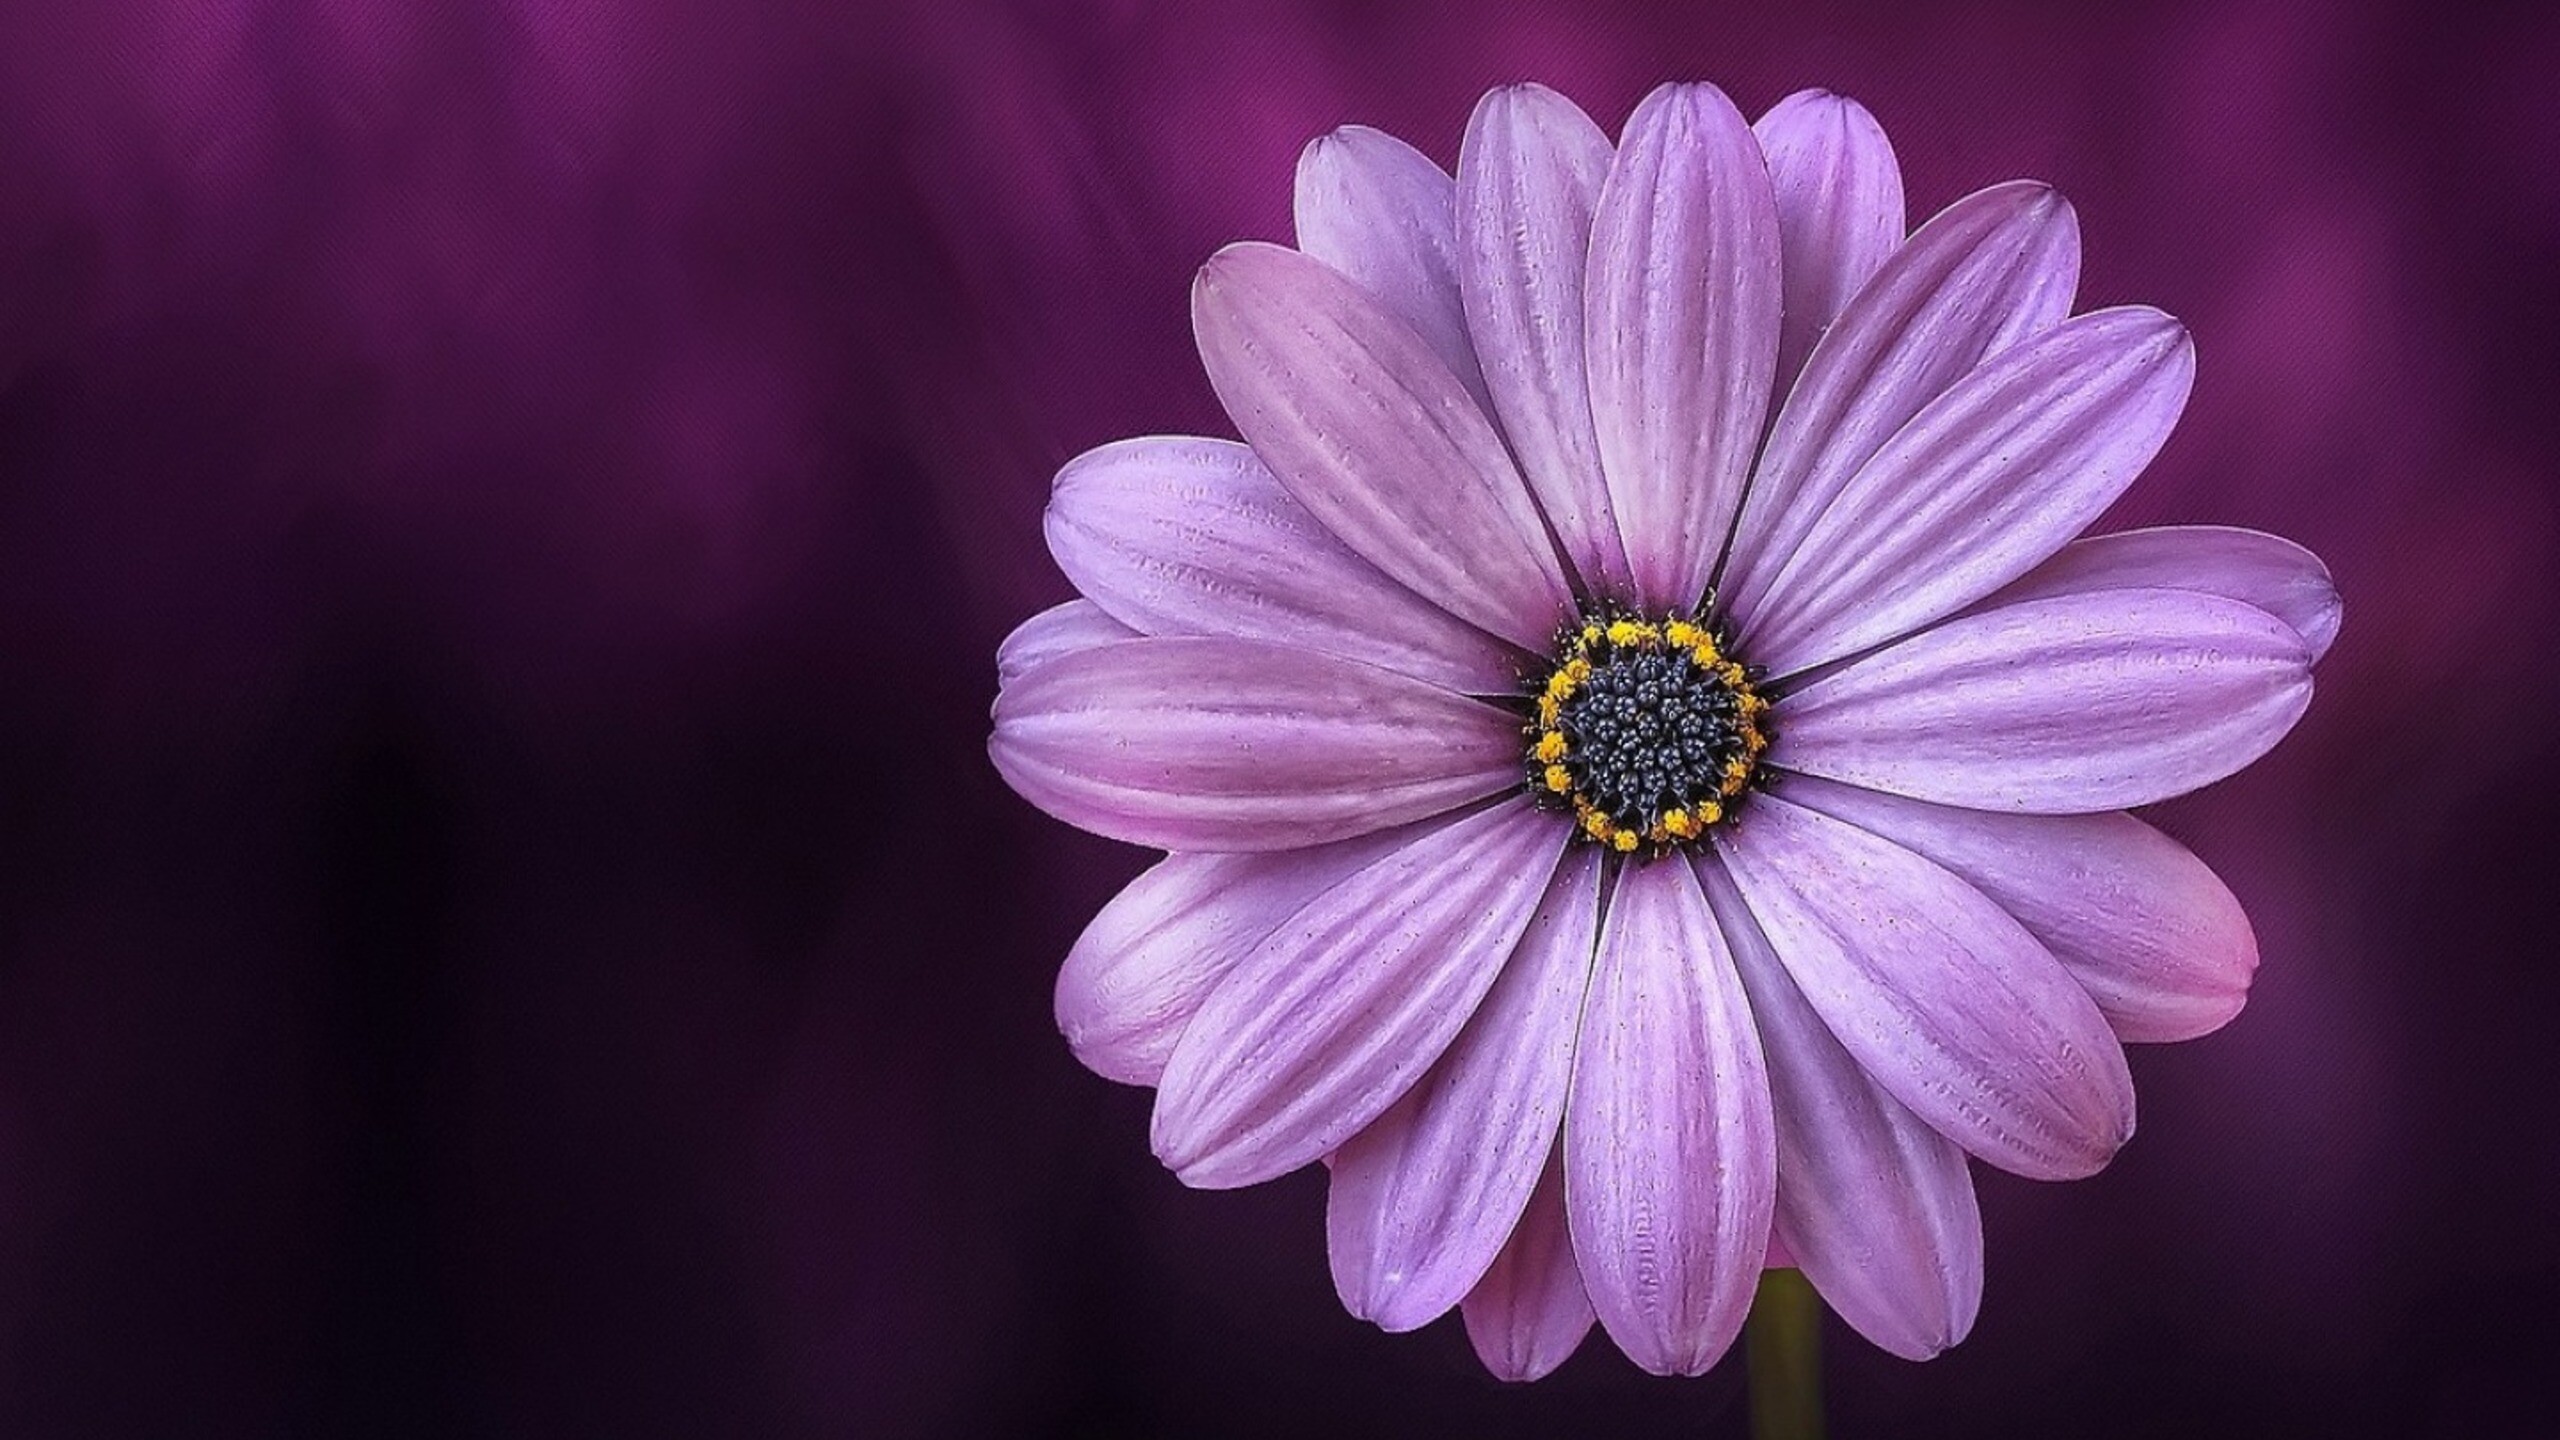 Daisy: A species of annual herb in the family Asteraceae. 2560x1440 HD Wallpaper.